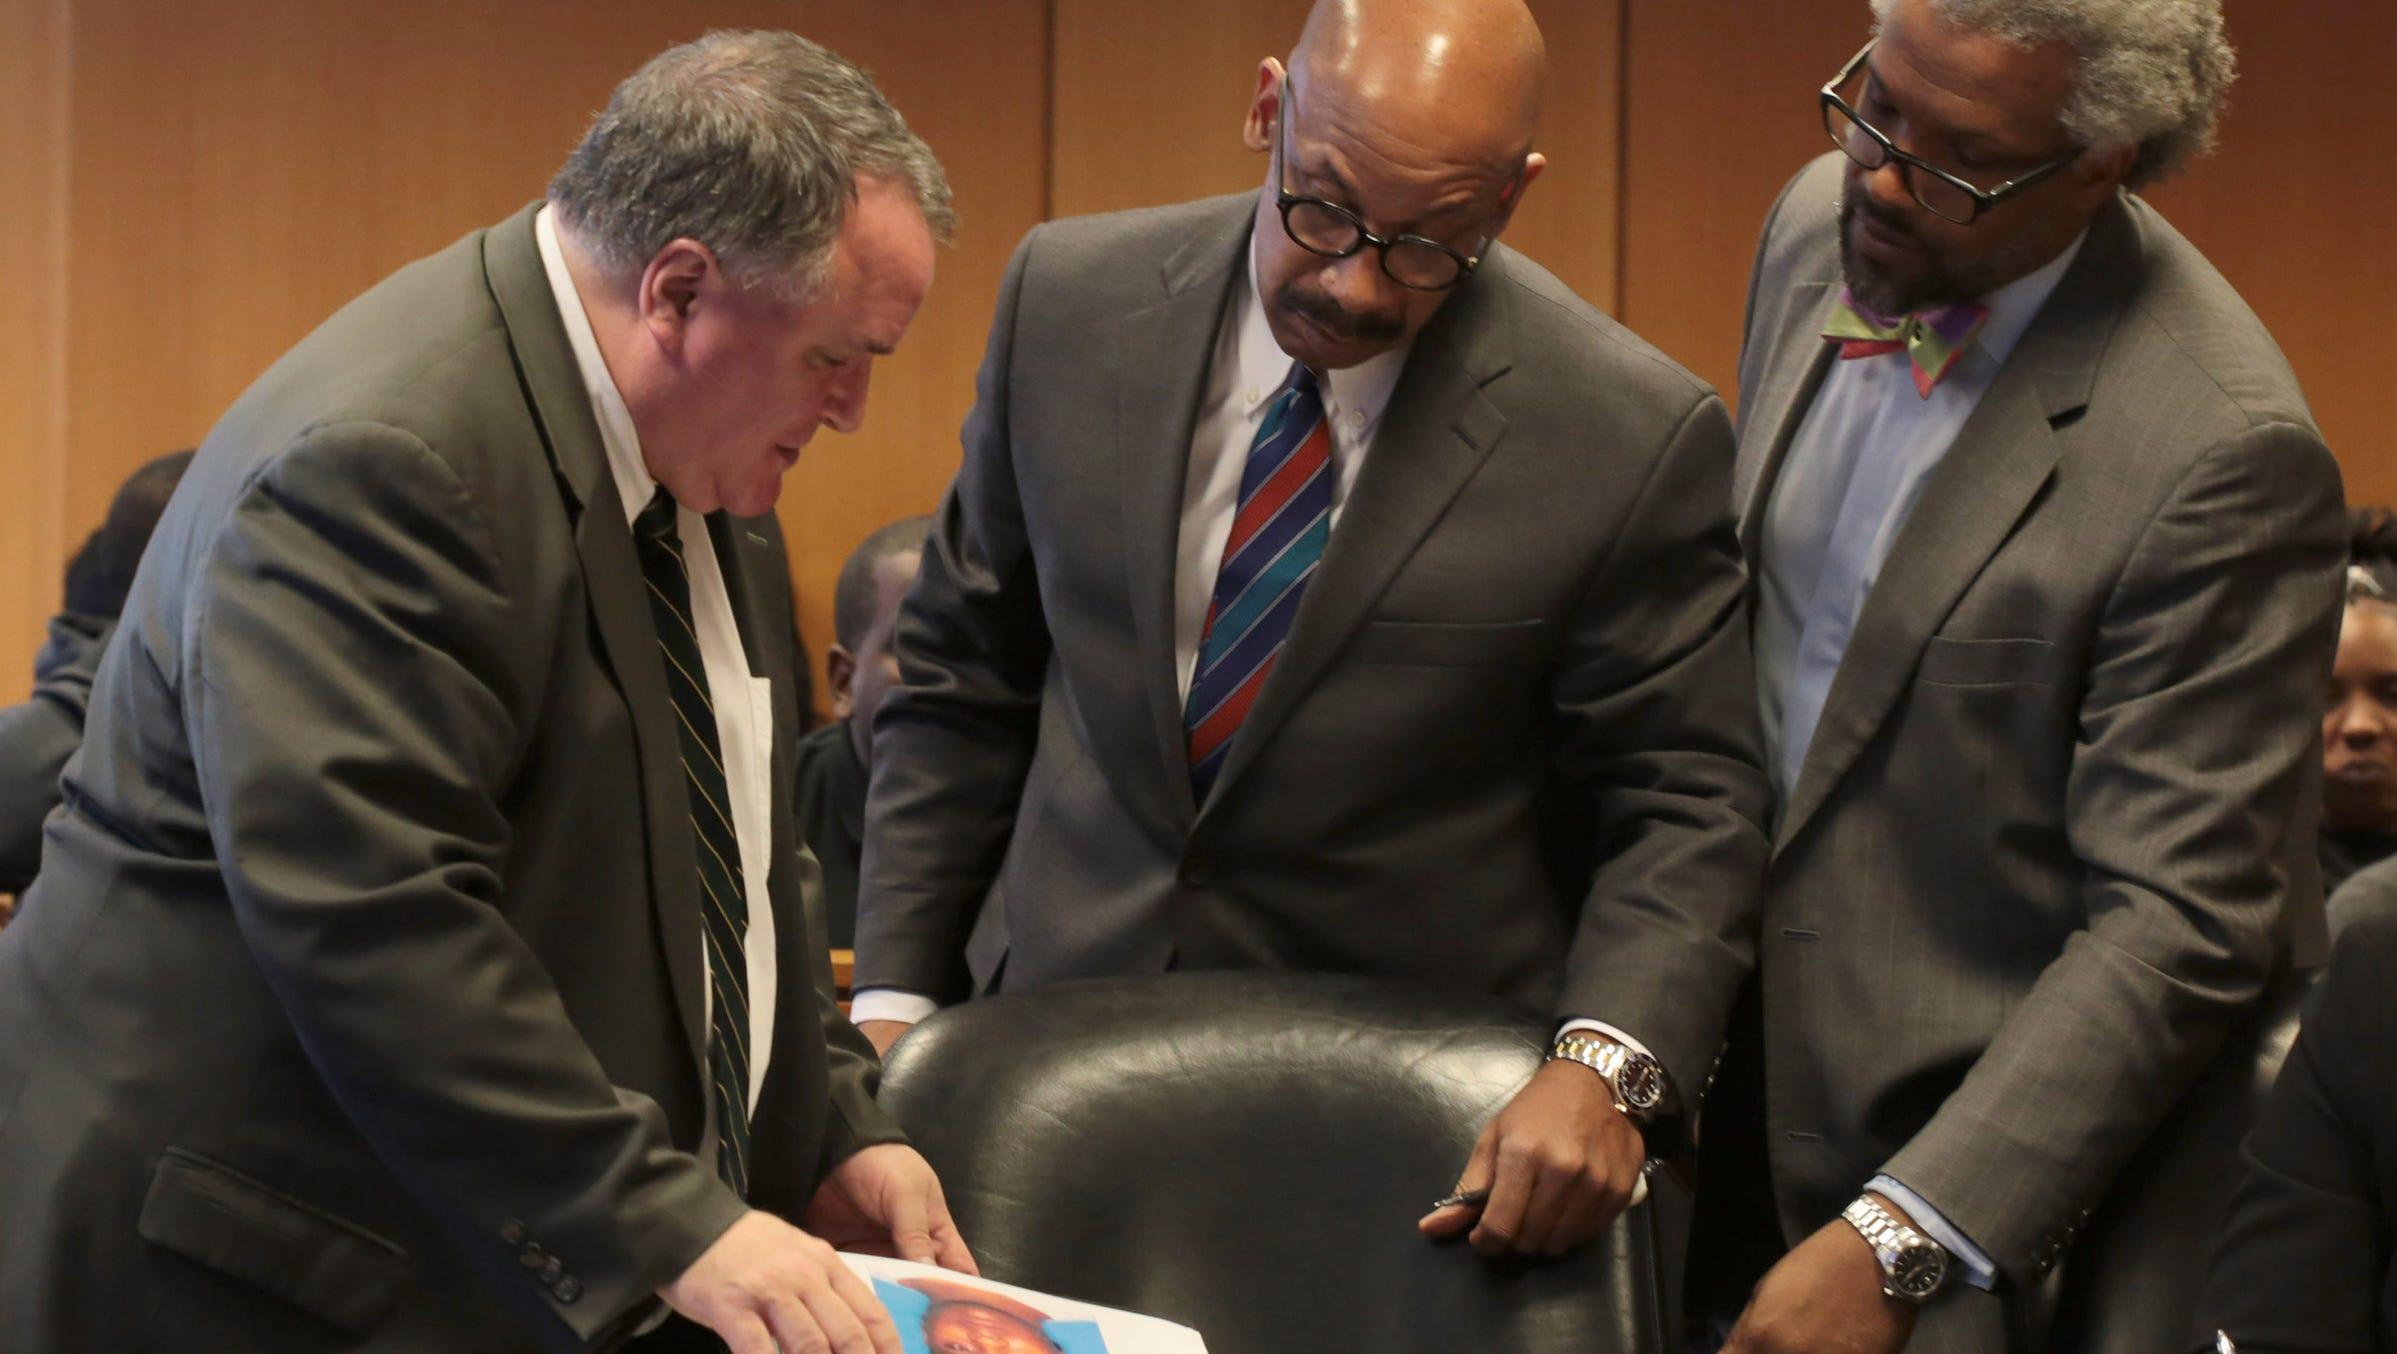 L-R Assistant Wayne County Prosecutor showing exhibit photos to defense attorneys, Marlon Blake Evans and Todd Perkins during preliminary examination for two men Dietrick Odums and Ottis Davis accused of killing rapper Dex Osama AKA(Byron Cox) at Frank Murphy Hall of Justice in Detroit on Friday, Oct. 23, 2015.